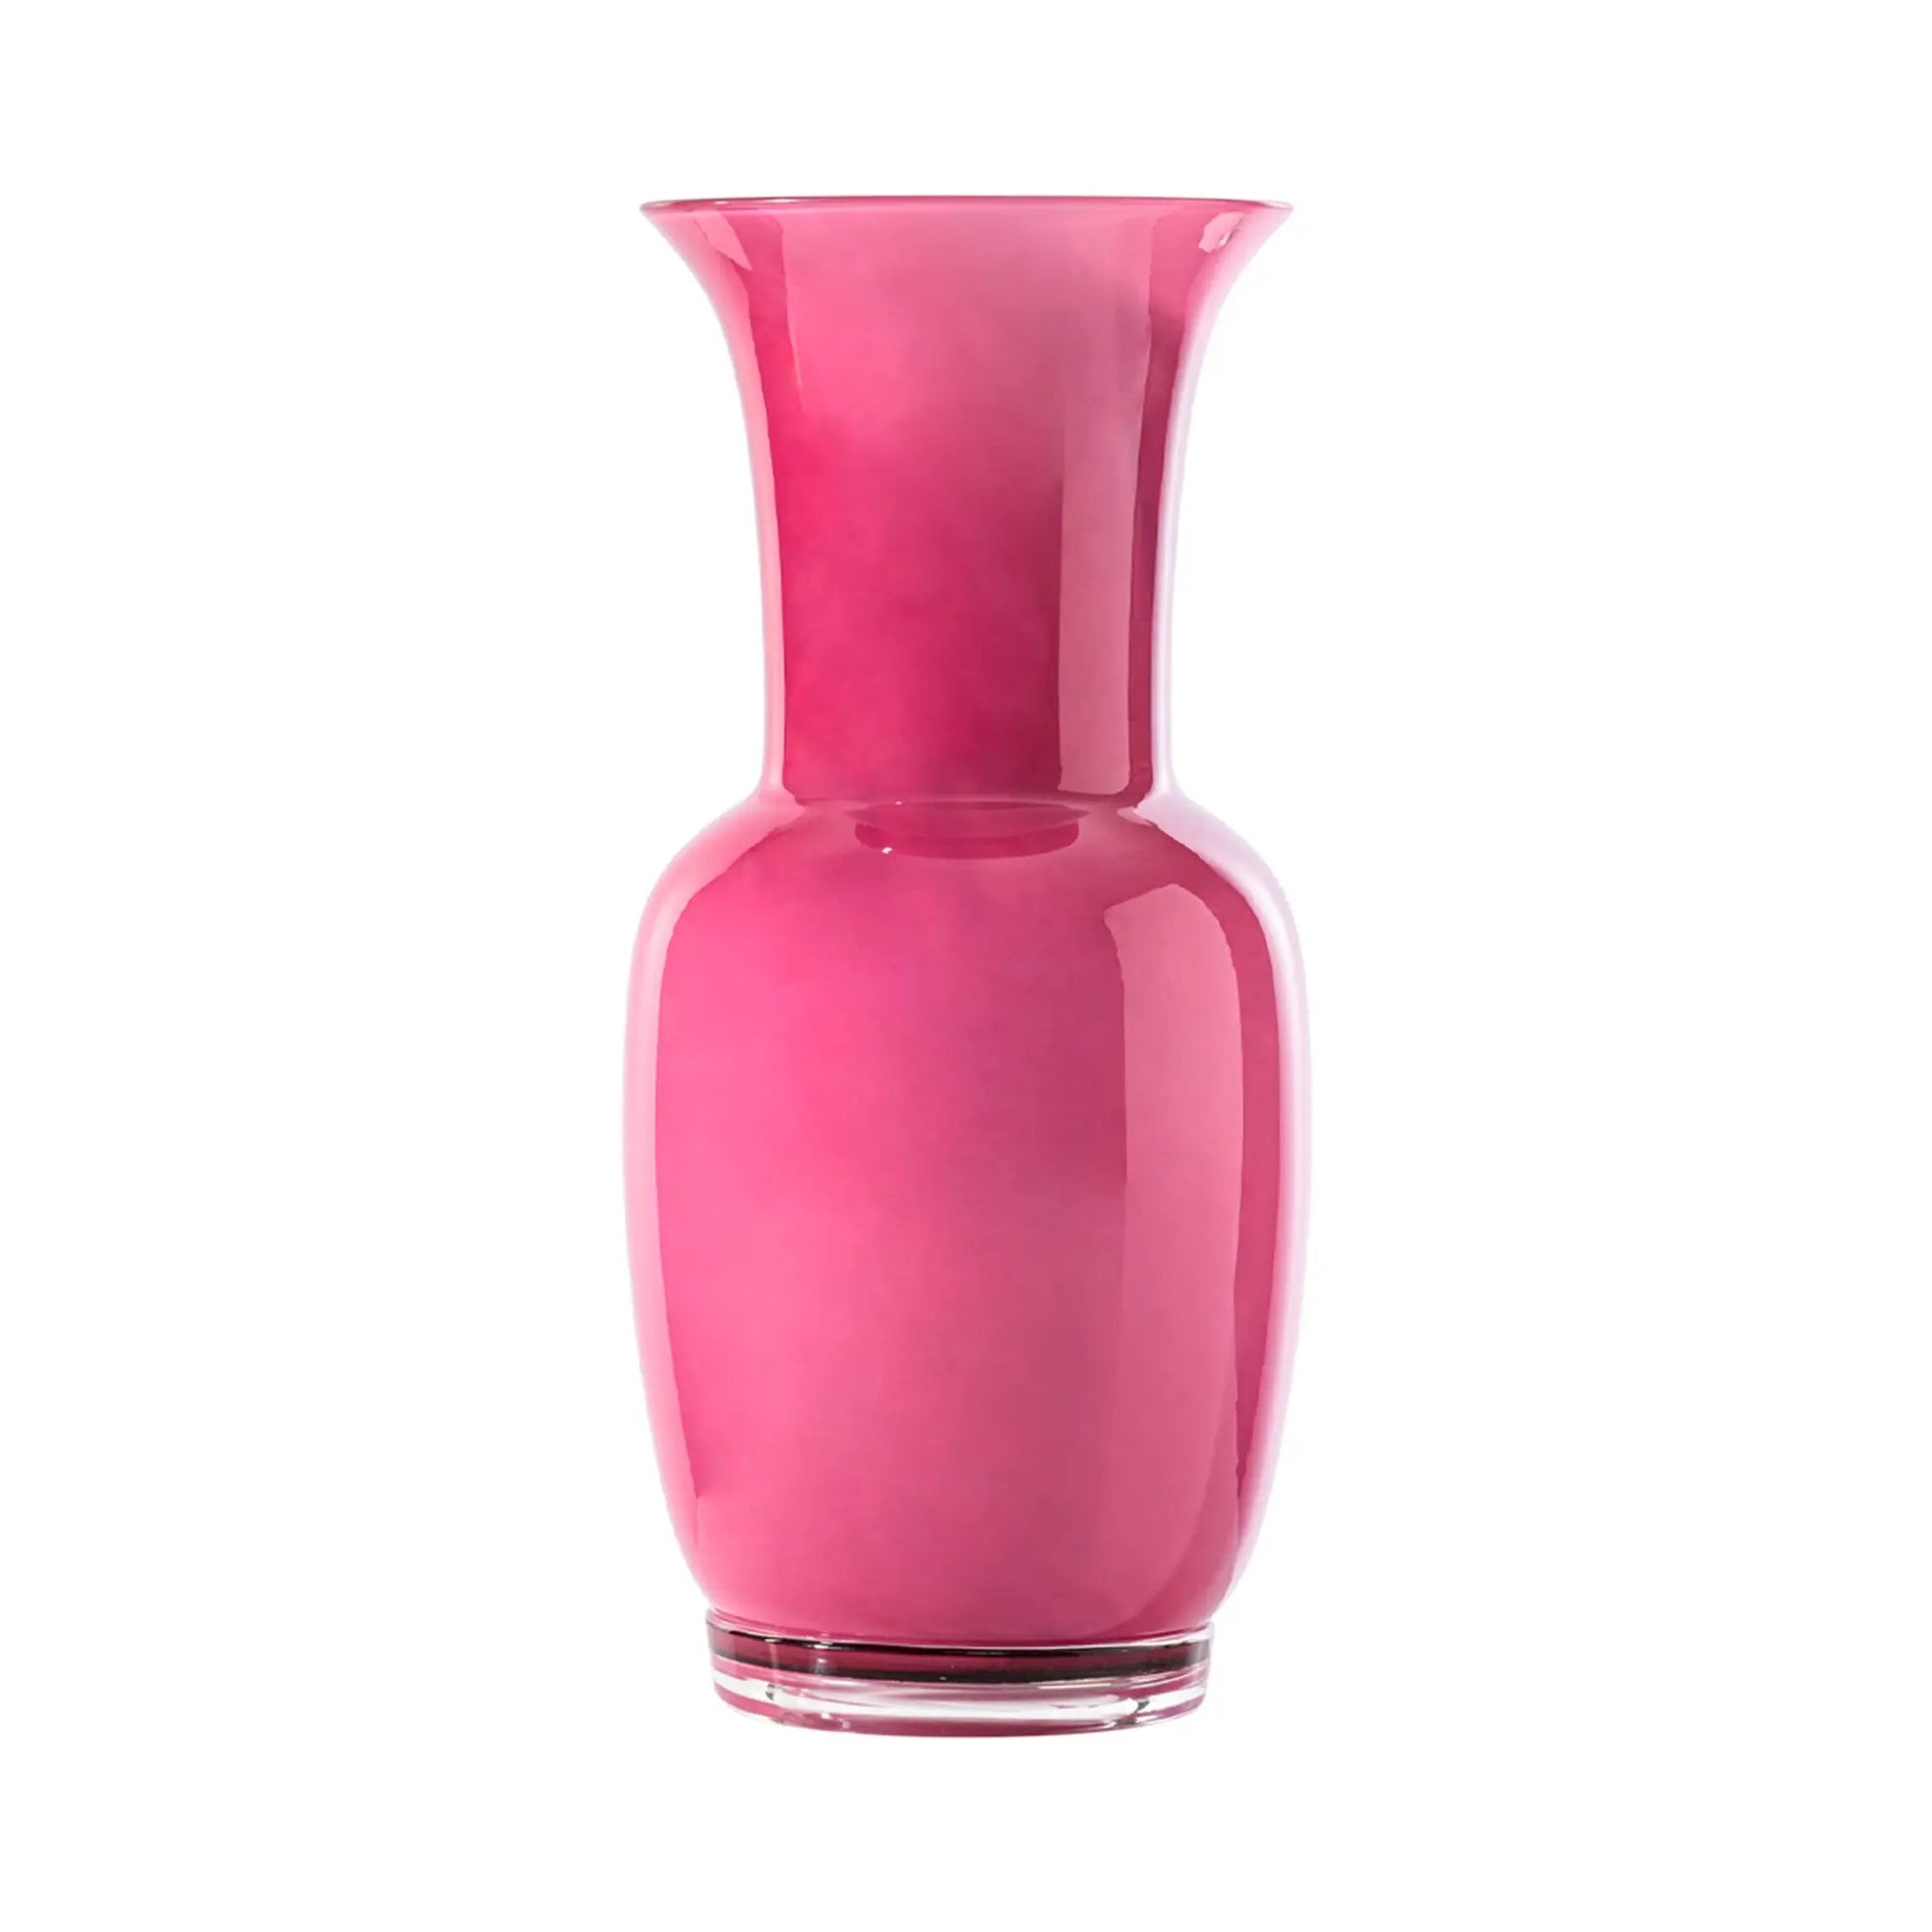 Opalino Murano Glass Vase by Venini | Handmade blown glass vase known for its purity, essential lines, and sophisticated colors | Available in matte or glossy, opale or transparent finishes | Exhibited worldwide for over ninety years | Home Decor Vases | 2Jour Concierge, your luxury lifestyle shop